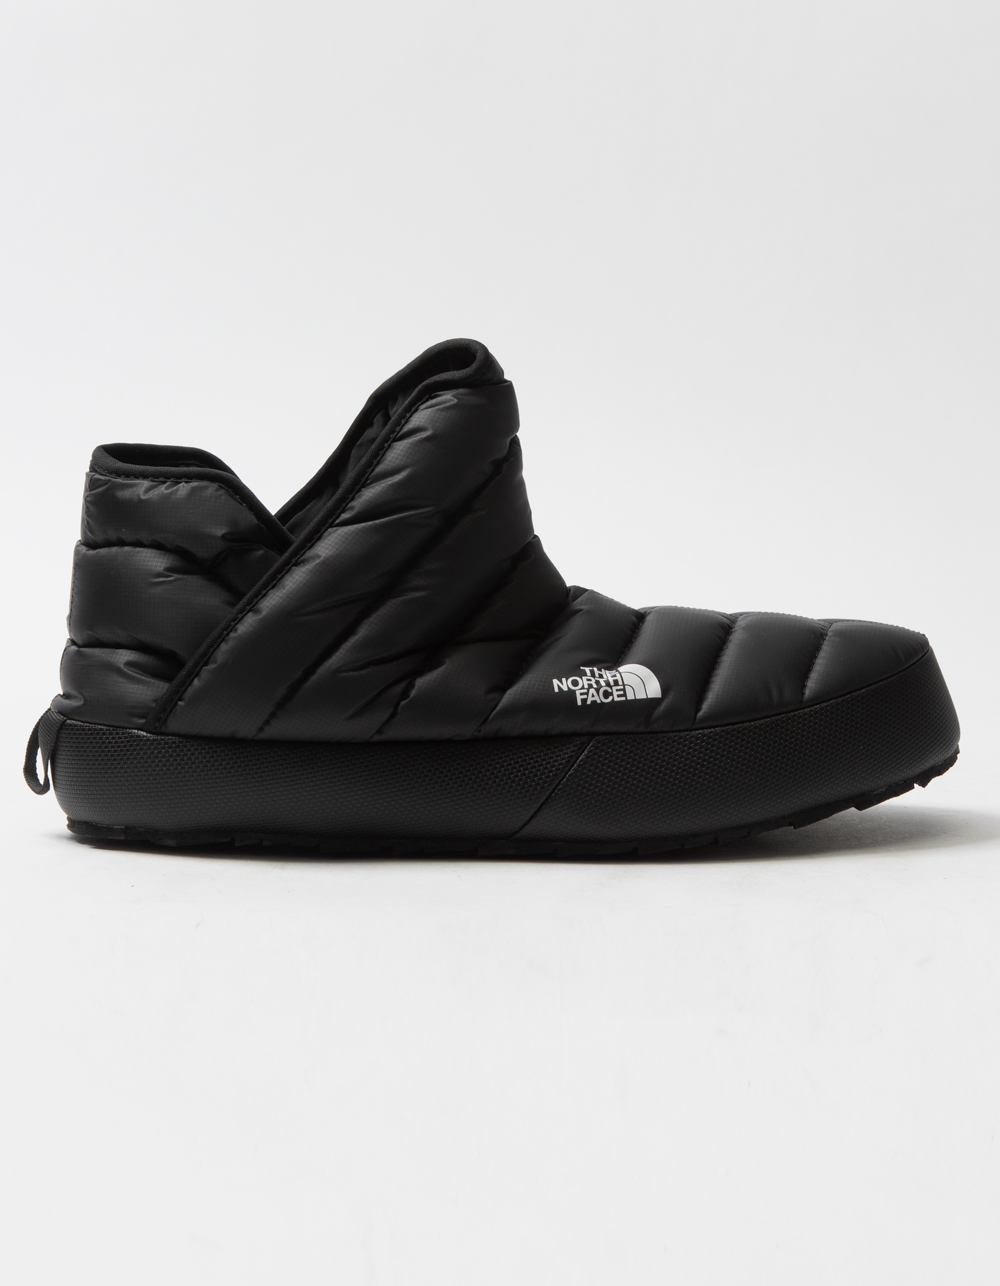 THE NORTH FACE Thermoball™ Traction Booties - BLK/WHT | Tillys